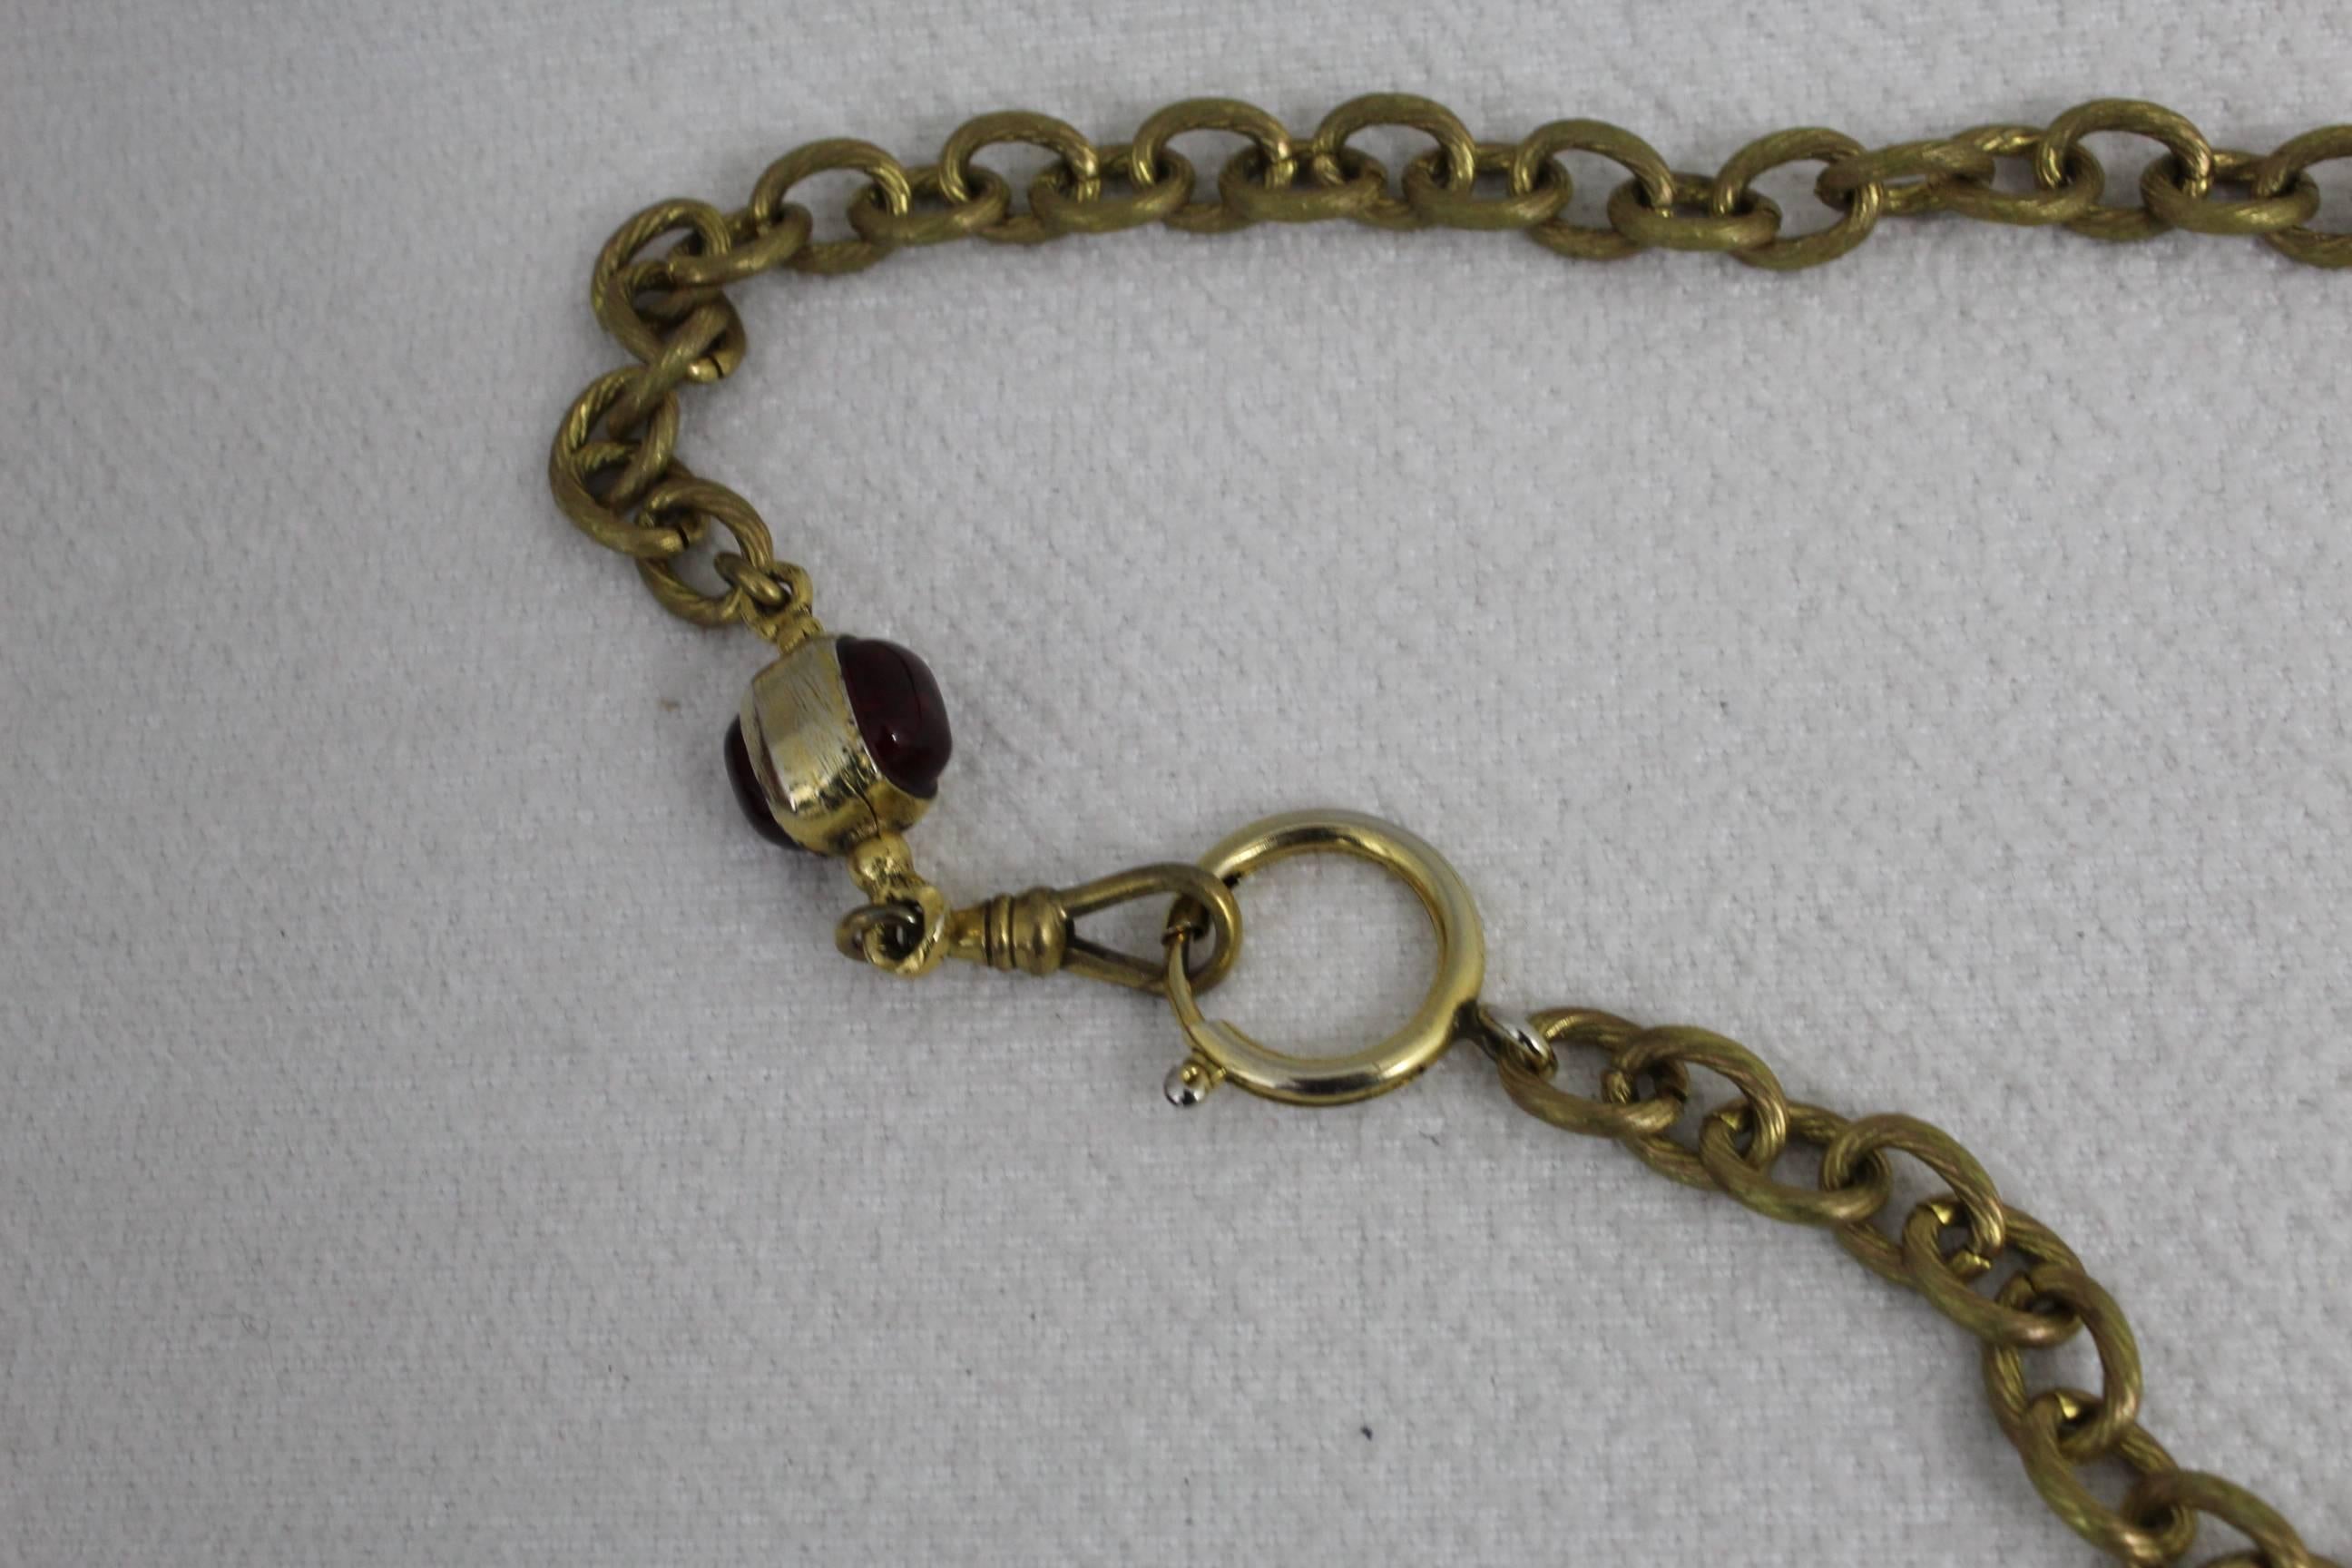 Nice Chanel Necklace in golden metaal with 3 beads in metal and glass .

Fait condition (price taakes this into account) as some golden parts shw signs of use anyhow is a super charmin vintage necklace iconic from Chanel 